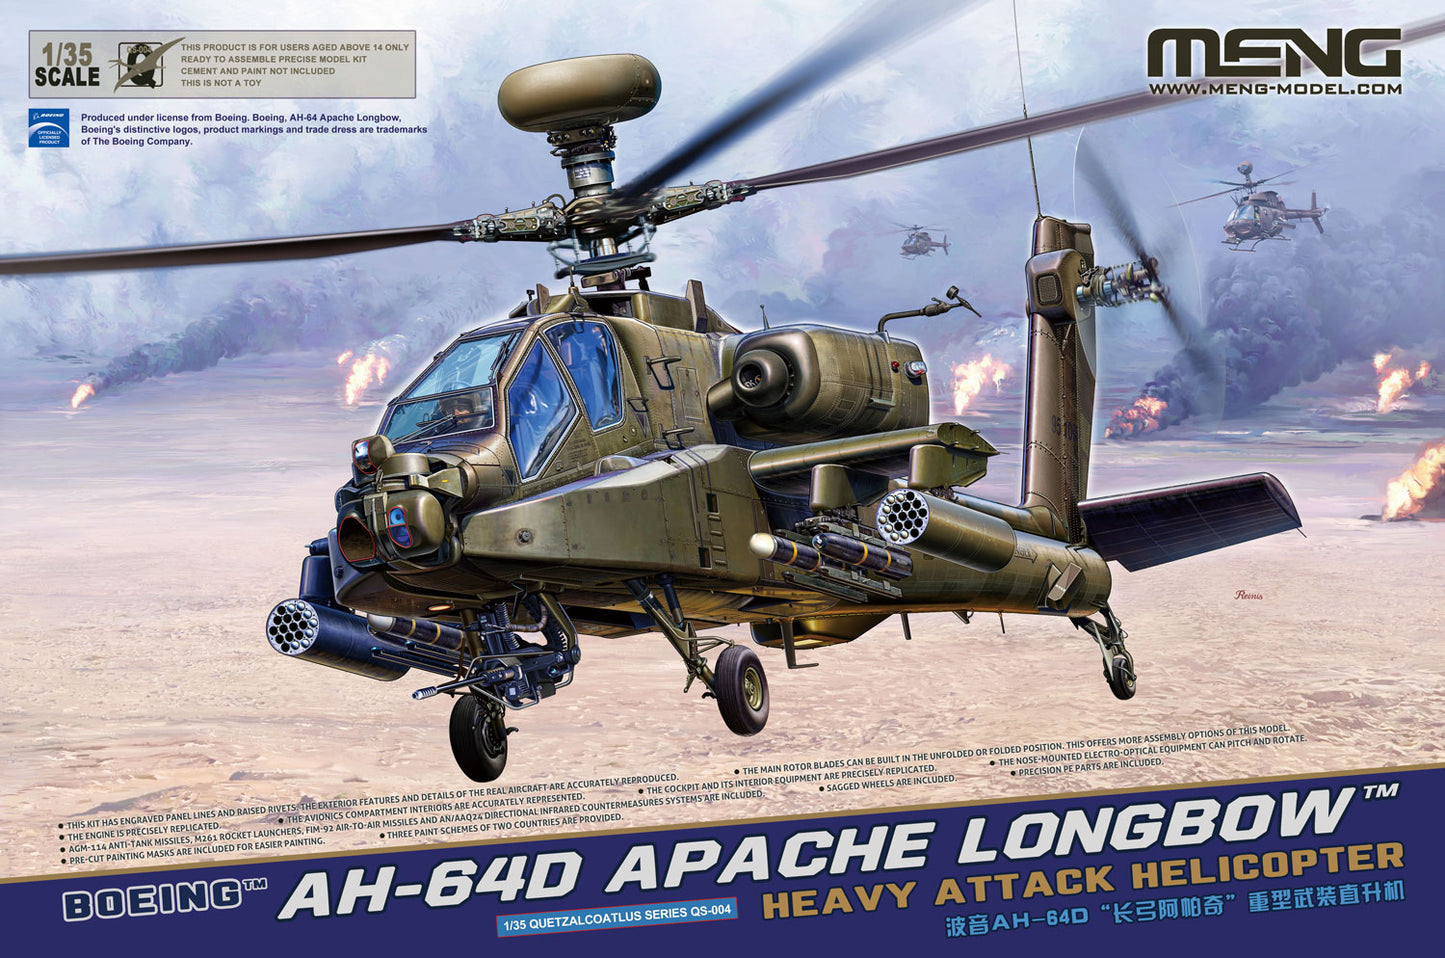 Meng Models QS004 1:35 Boeing AH-64D Apache Longbow Heavy Attack Helicopter Kit